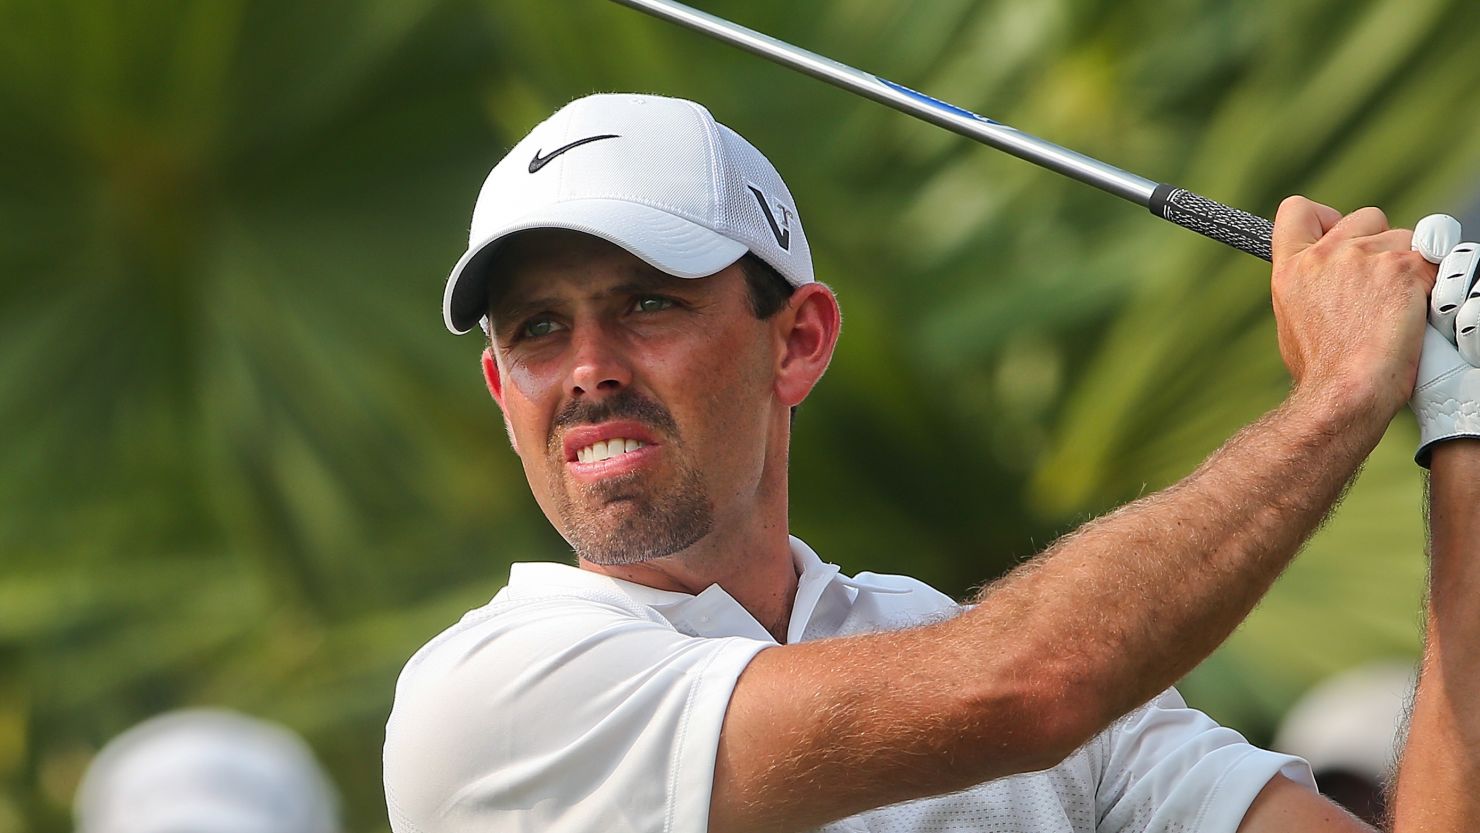 Charl Schwartzel plays a tee shot during his second round as he claimed the halfway lead at the Thailand Open.